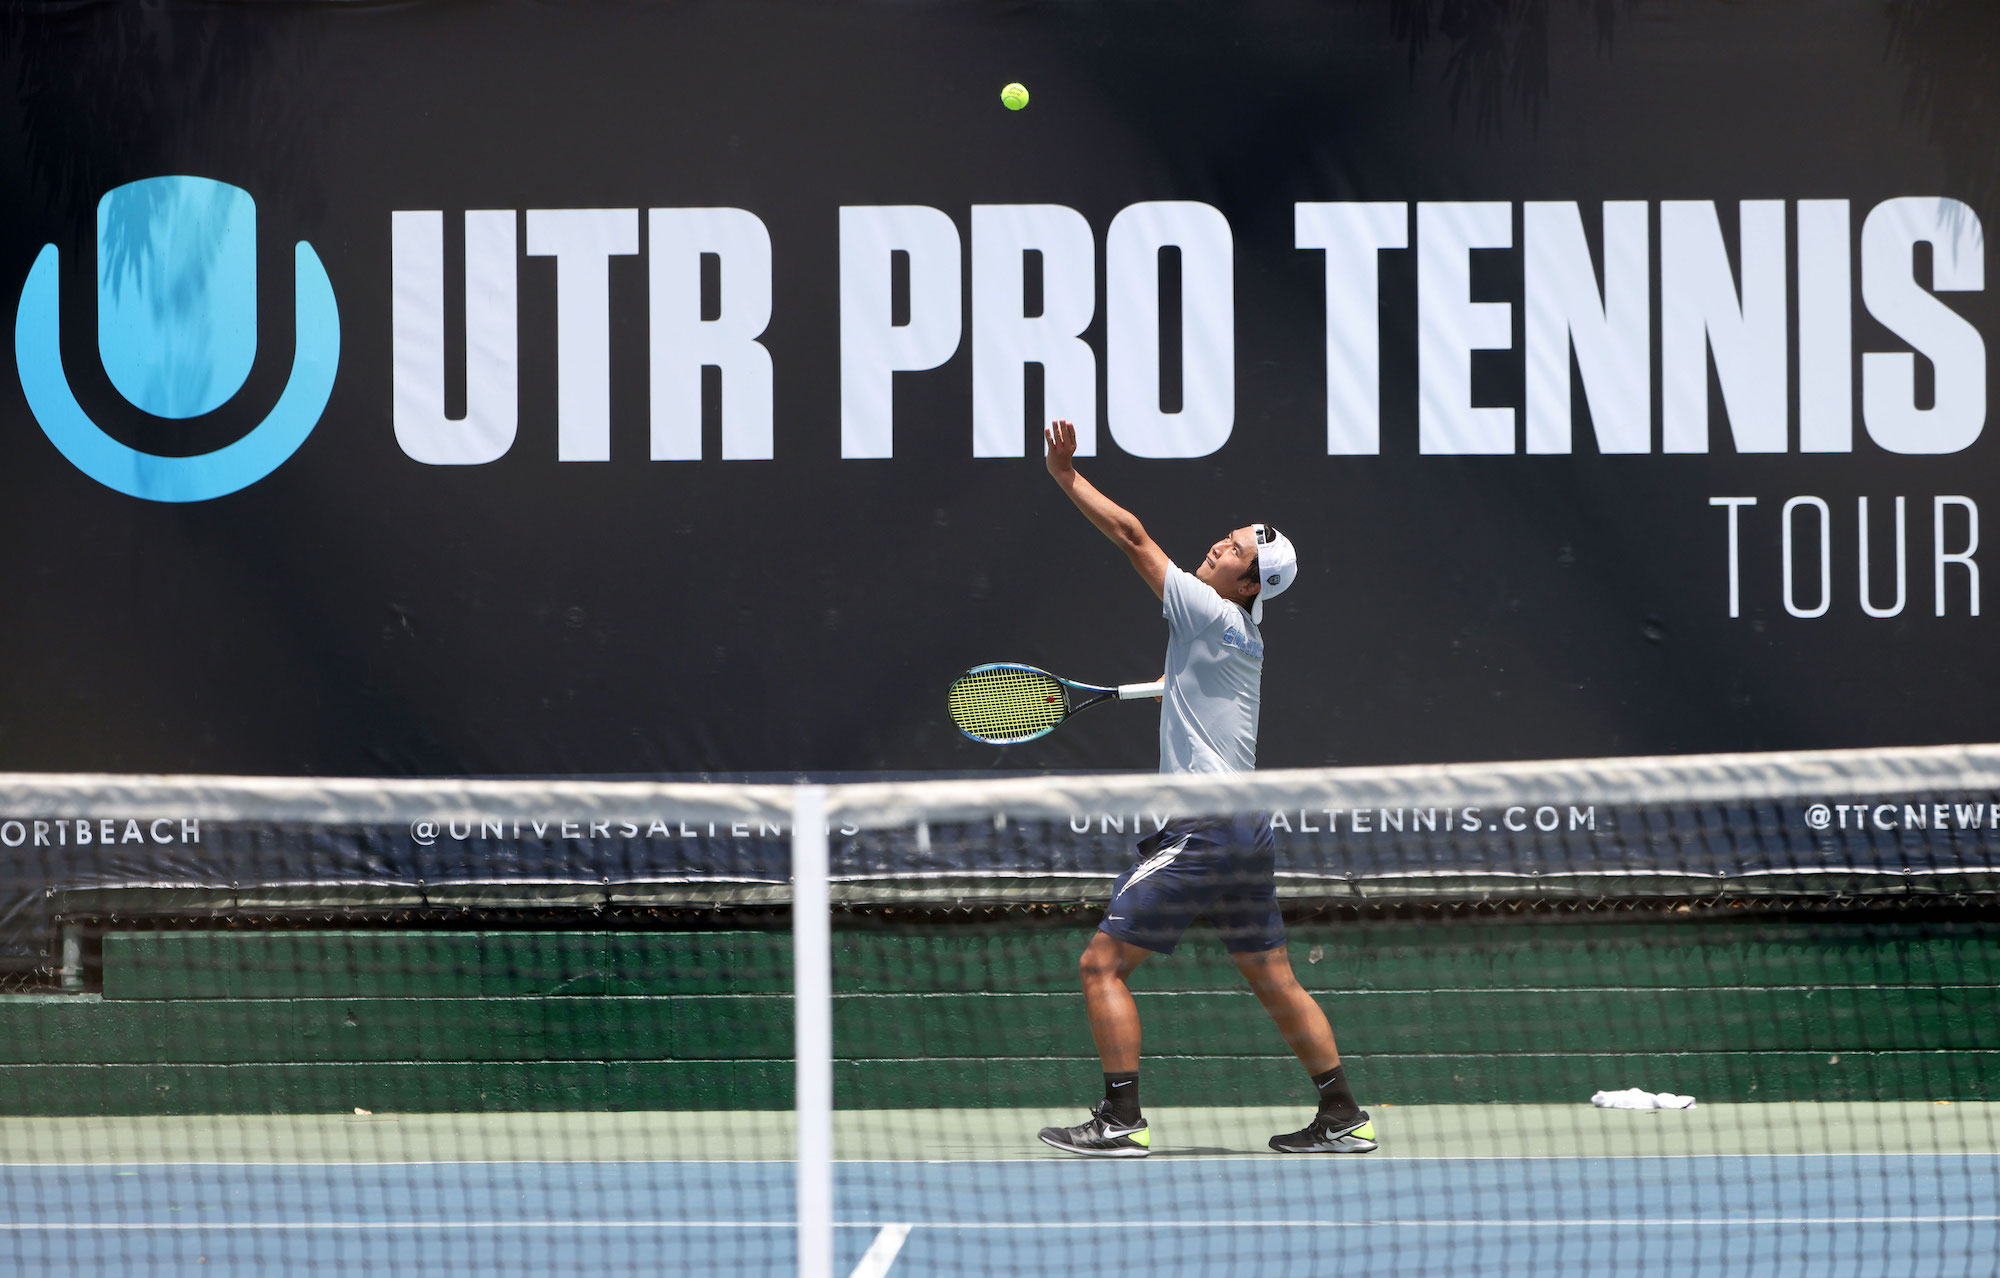 Universal Tennis Chooses M2A Media to Syndicate the Delivery of its Live Match Feeds in the Cloud